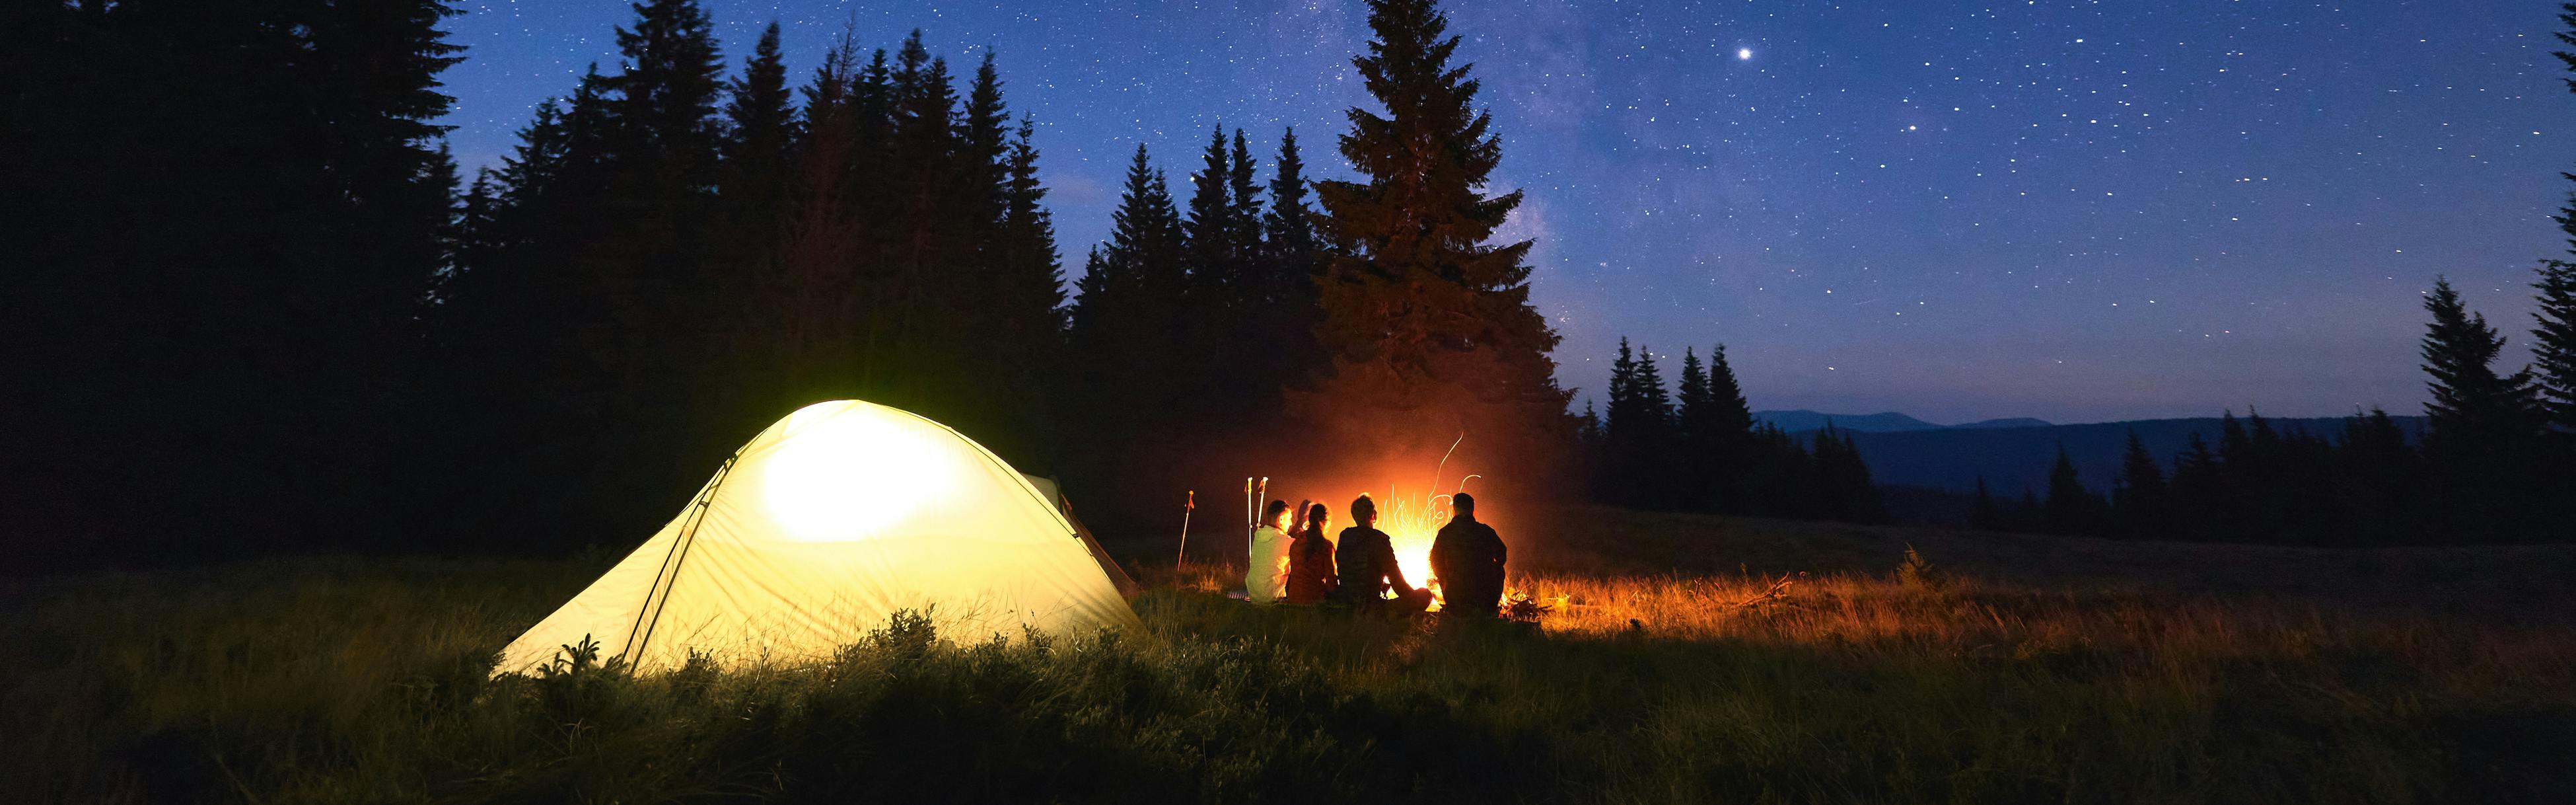 A group of people gather around a campfire at night while a tent glows behind them